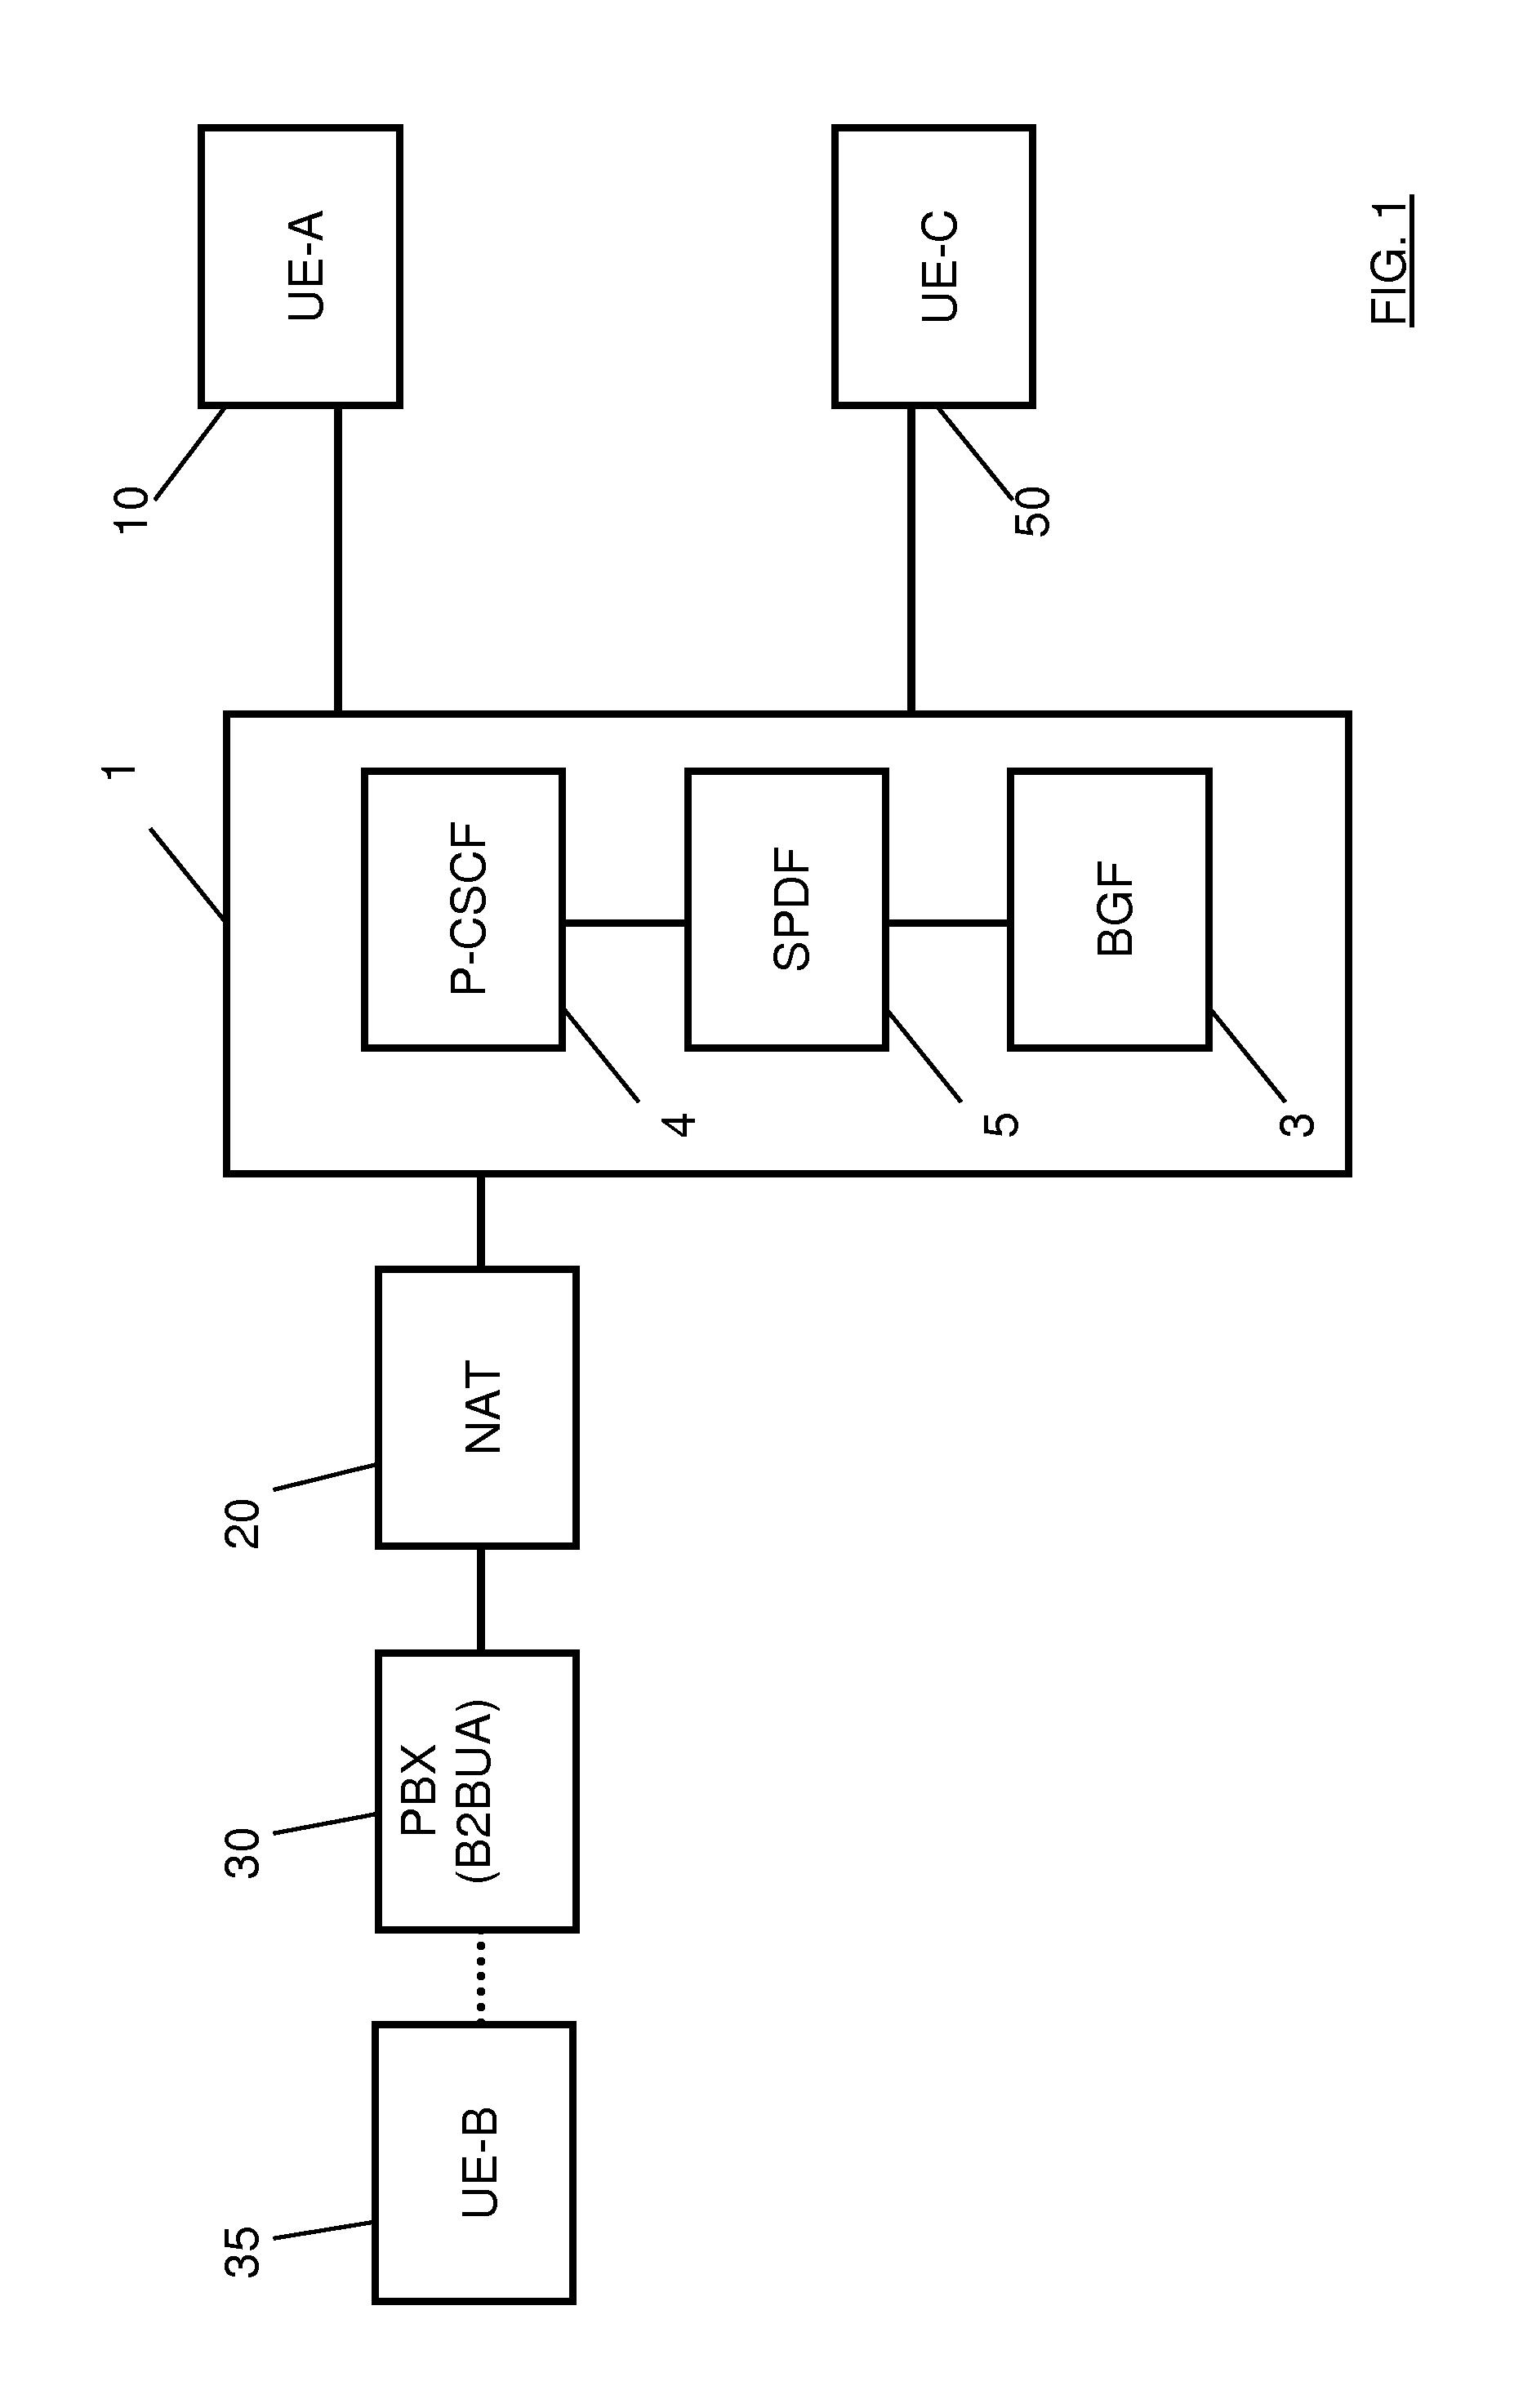 Connection Control with B2BUA Located Behind NAT Gateway